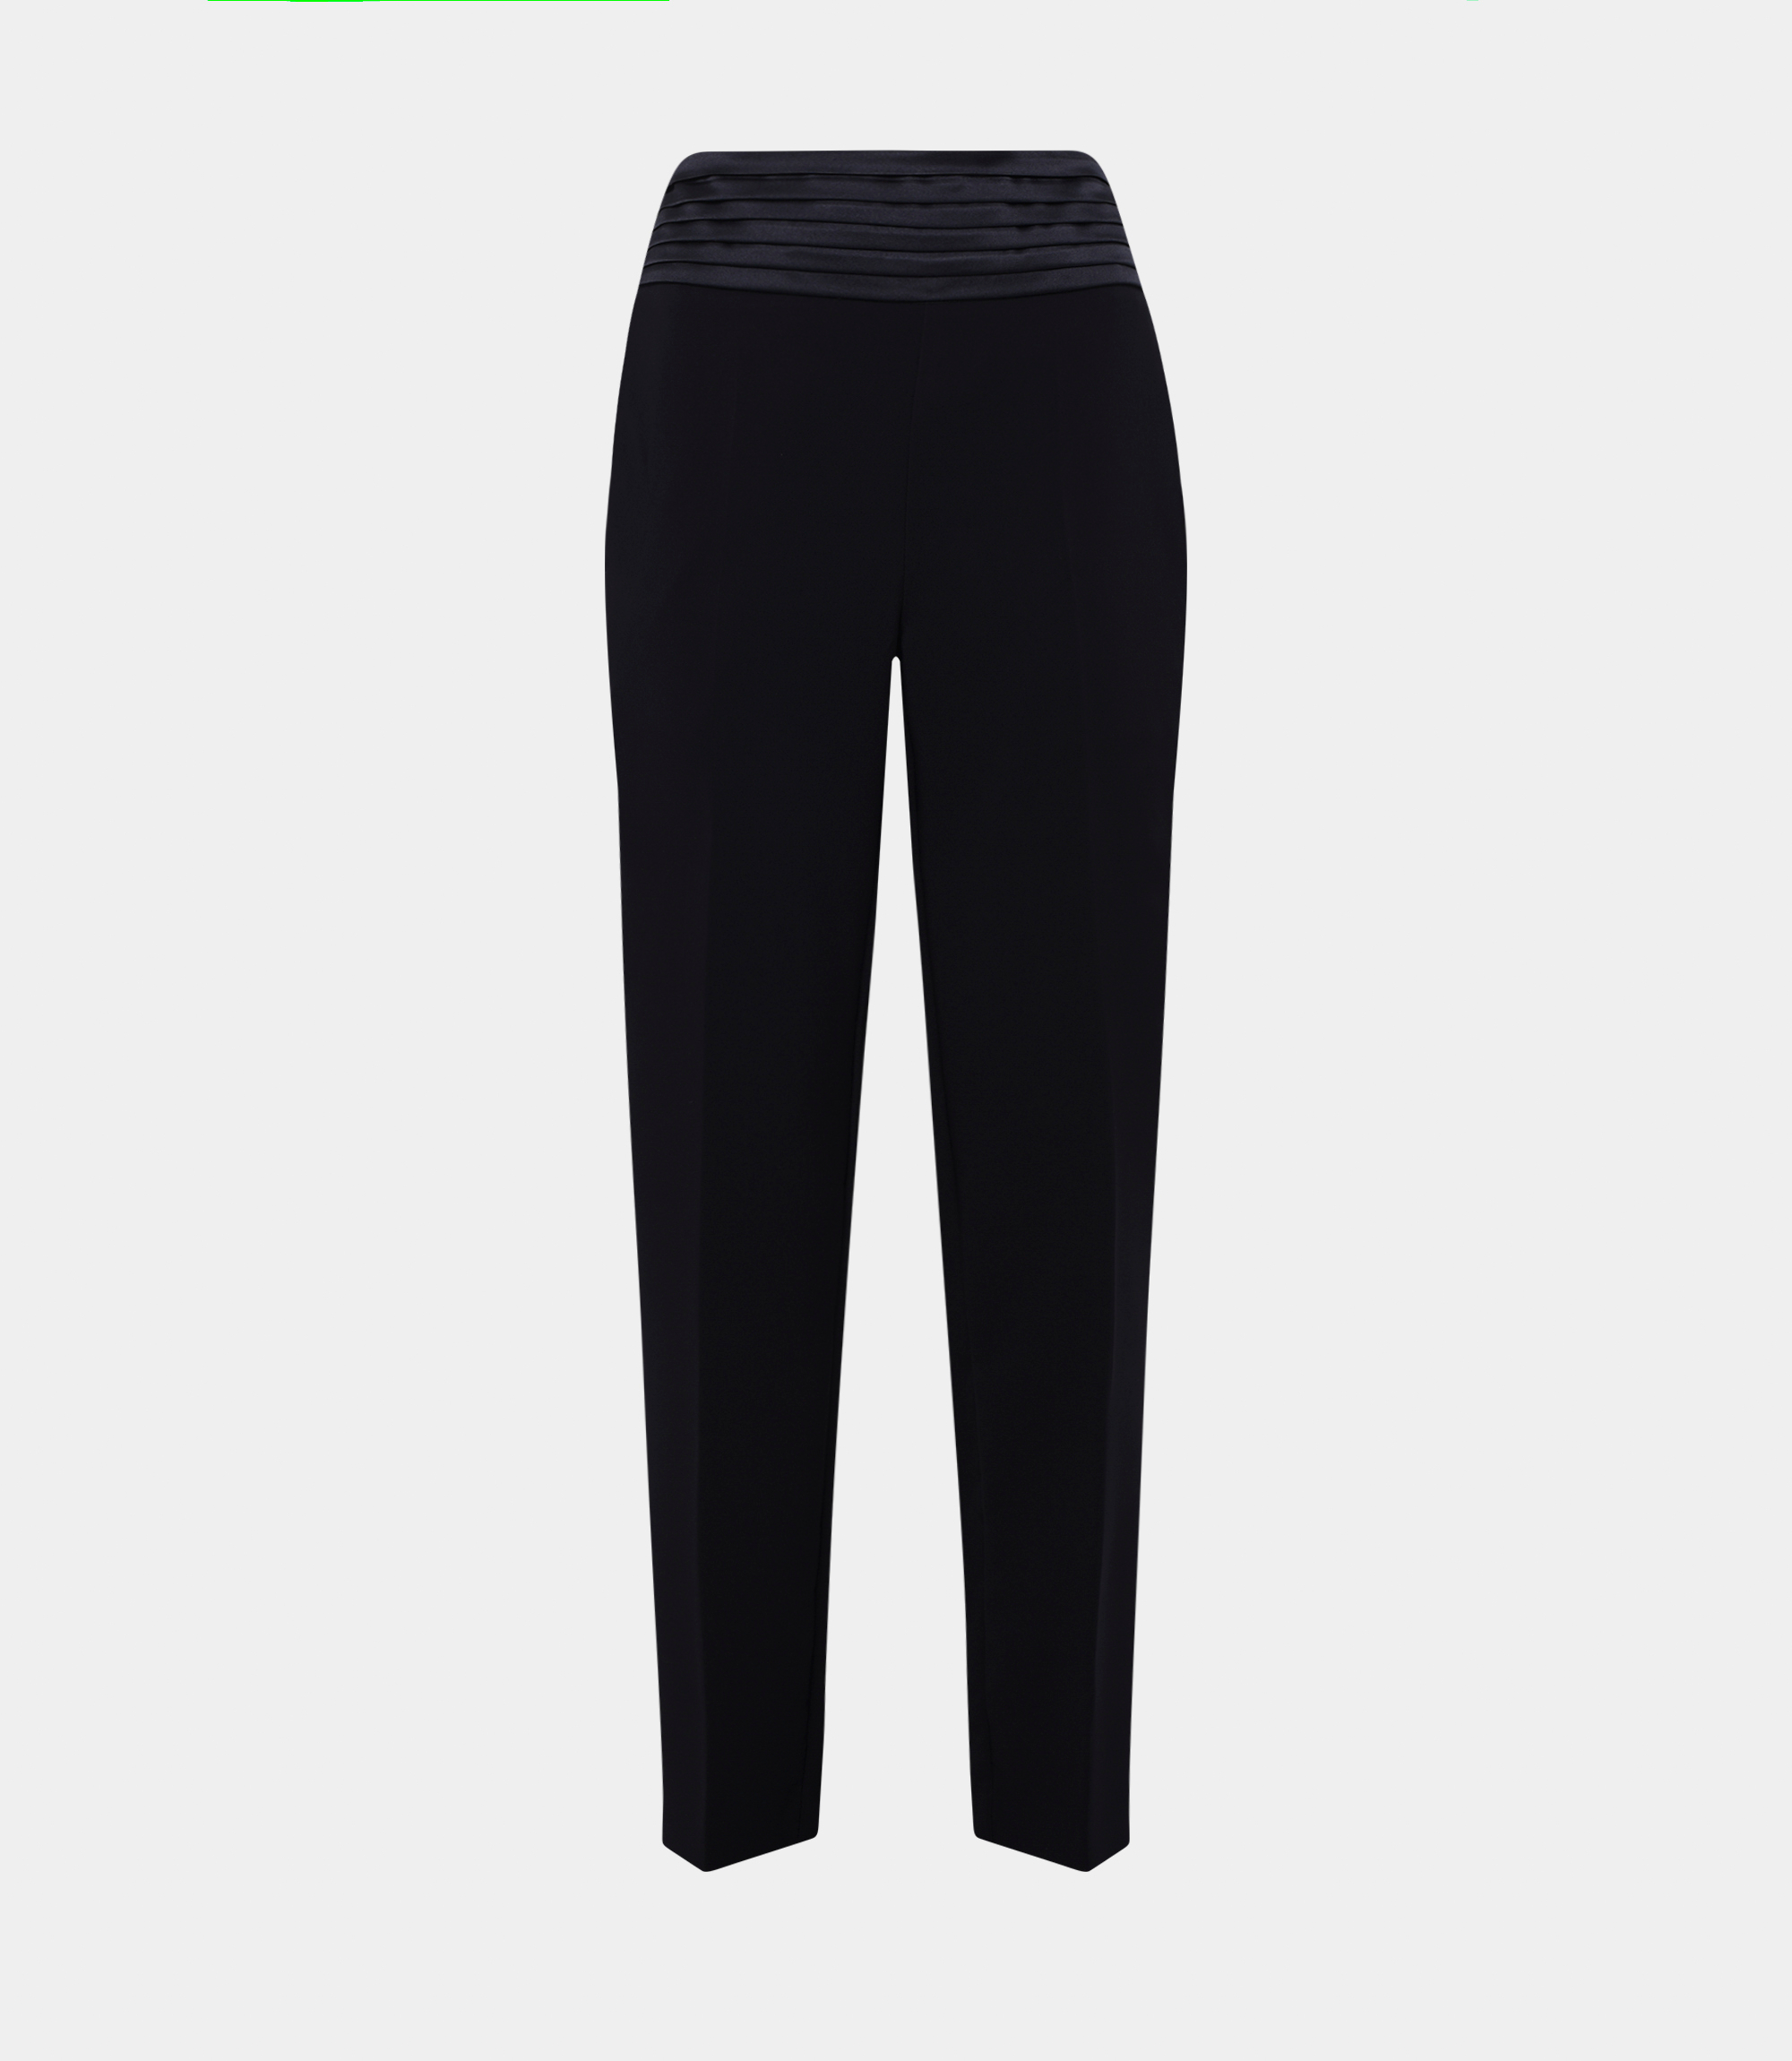 Dinner jacket trousers with classic cut - CLOTHING - NaraMilano